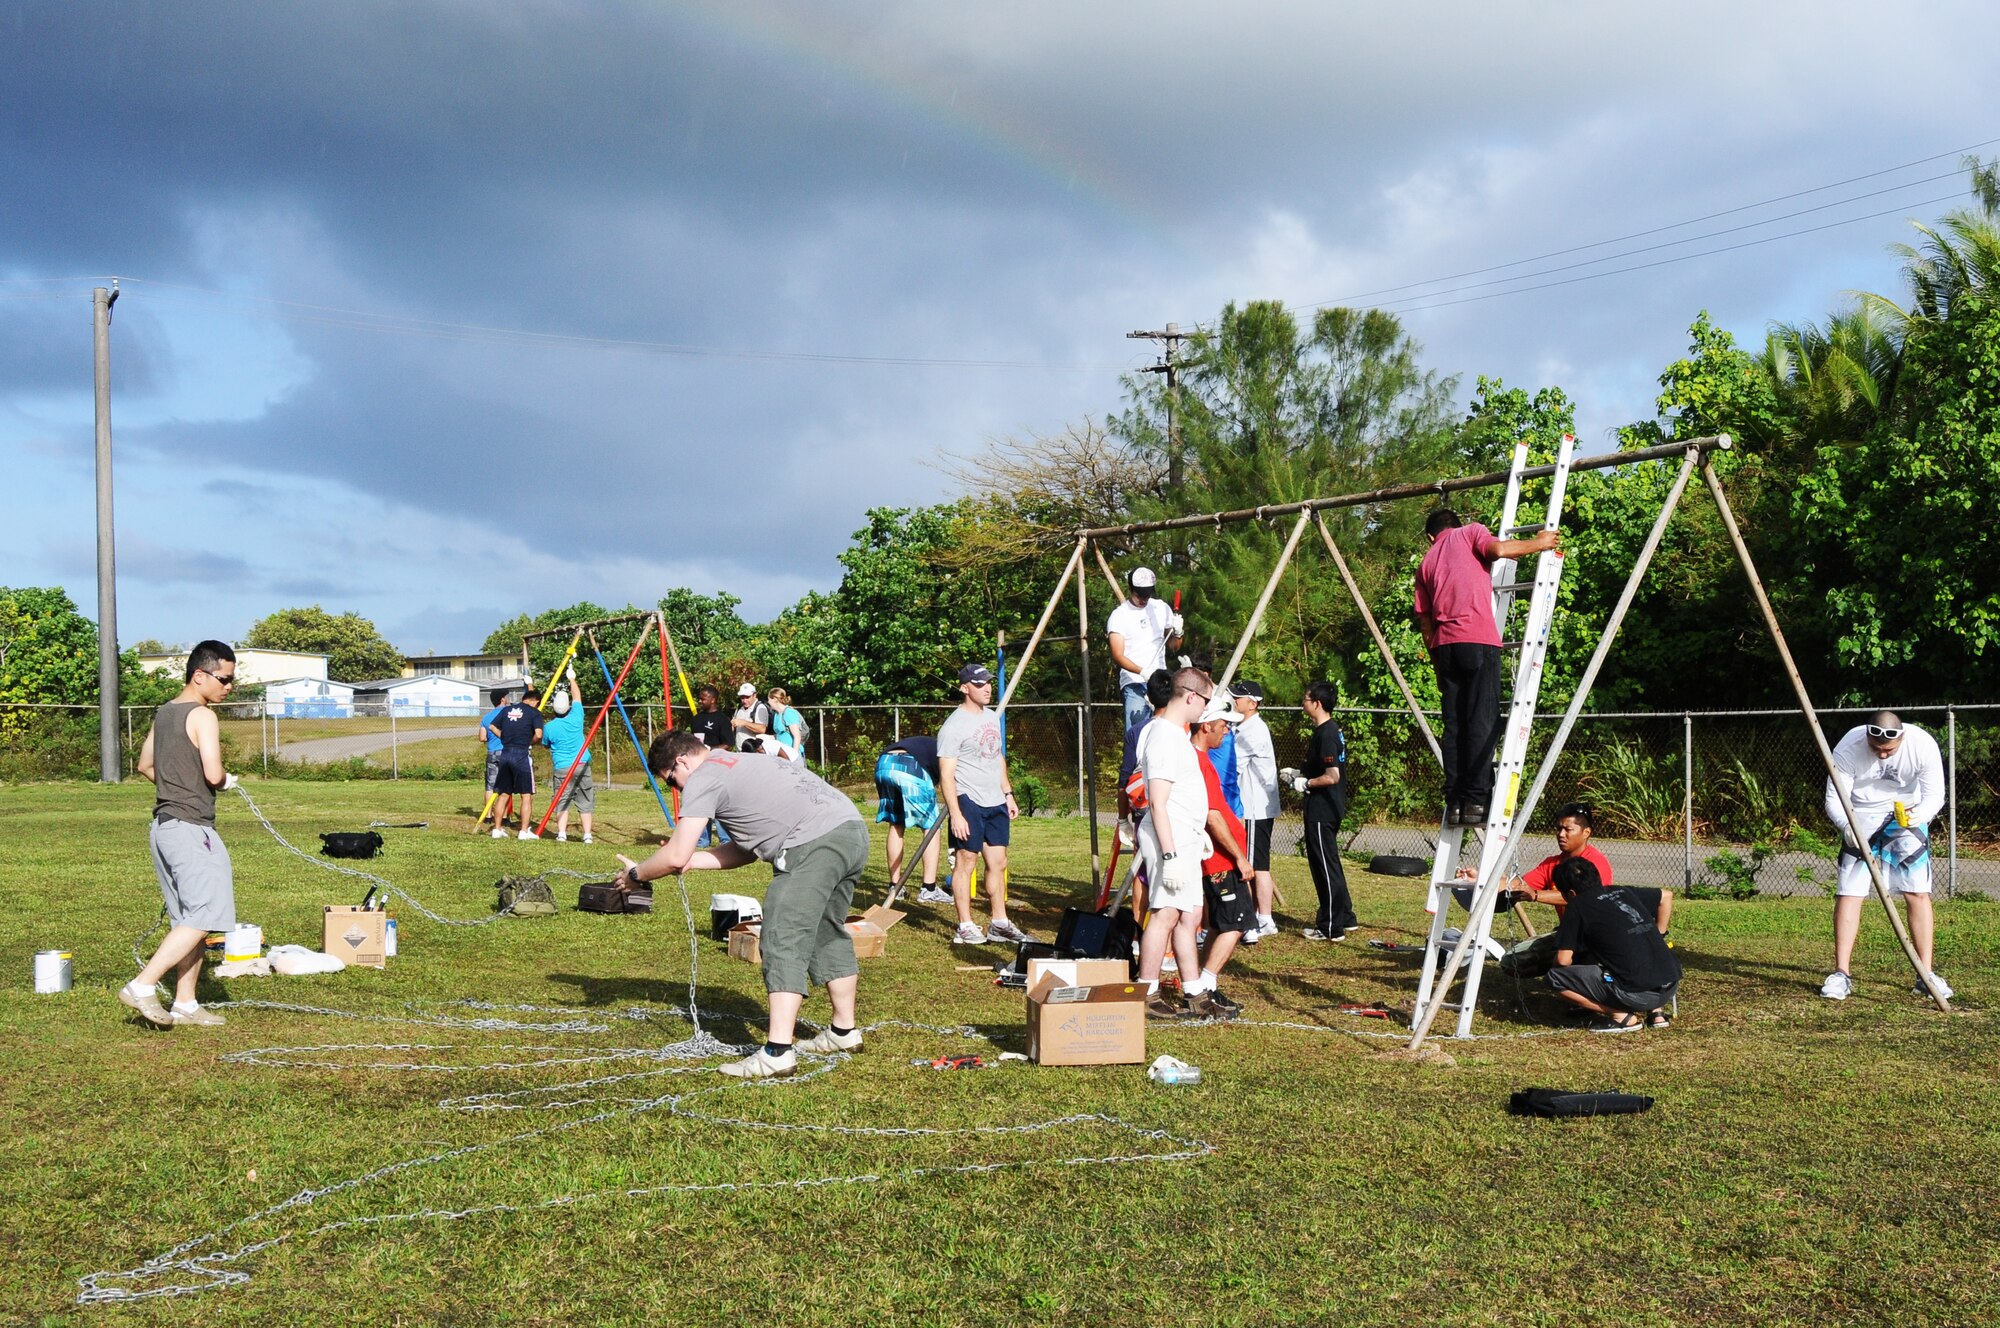 Members of Team Andersen along with members from the Japan Air Self Defense Force and the Royal Australian Air Force participate in a community beautification project in Dededo, Guam, Feb. 18. The community event was part of Cope North 2012 a multinational exercise designed to enhance air operations between the U.S. Air Force, JASDF and the RAAF. (U.S. Air Force photo/Senior Airman Carlin Leslie)